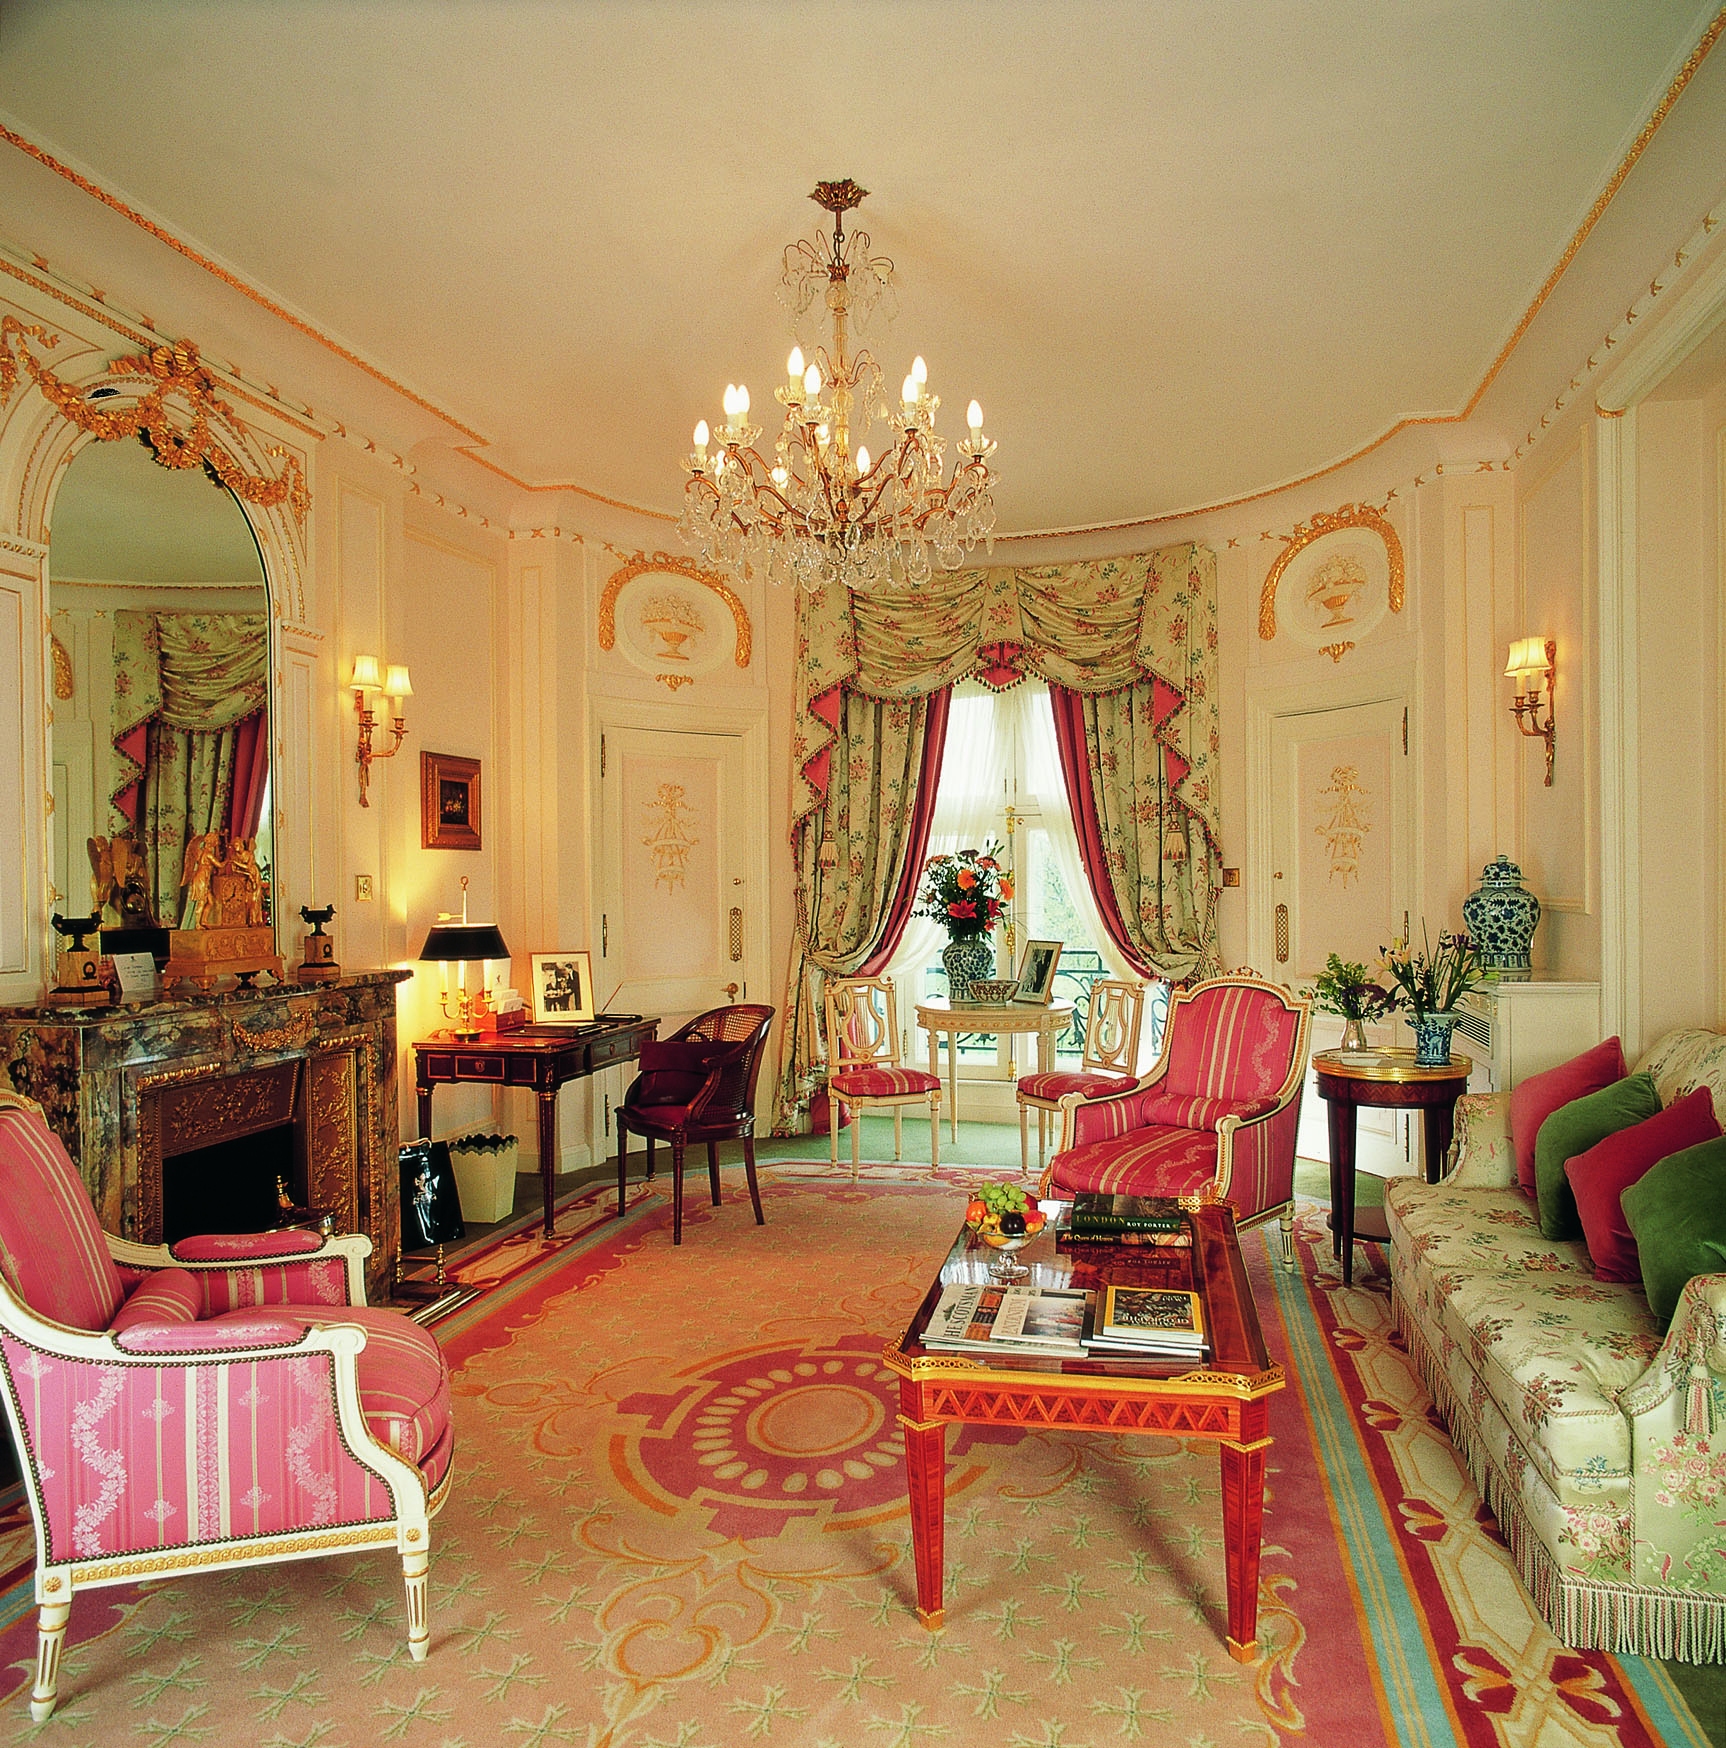 A suite at the Ritz London